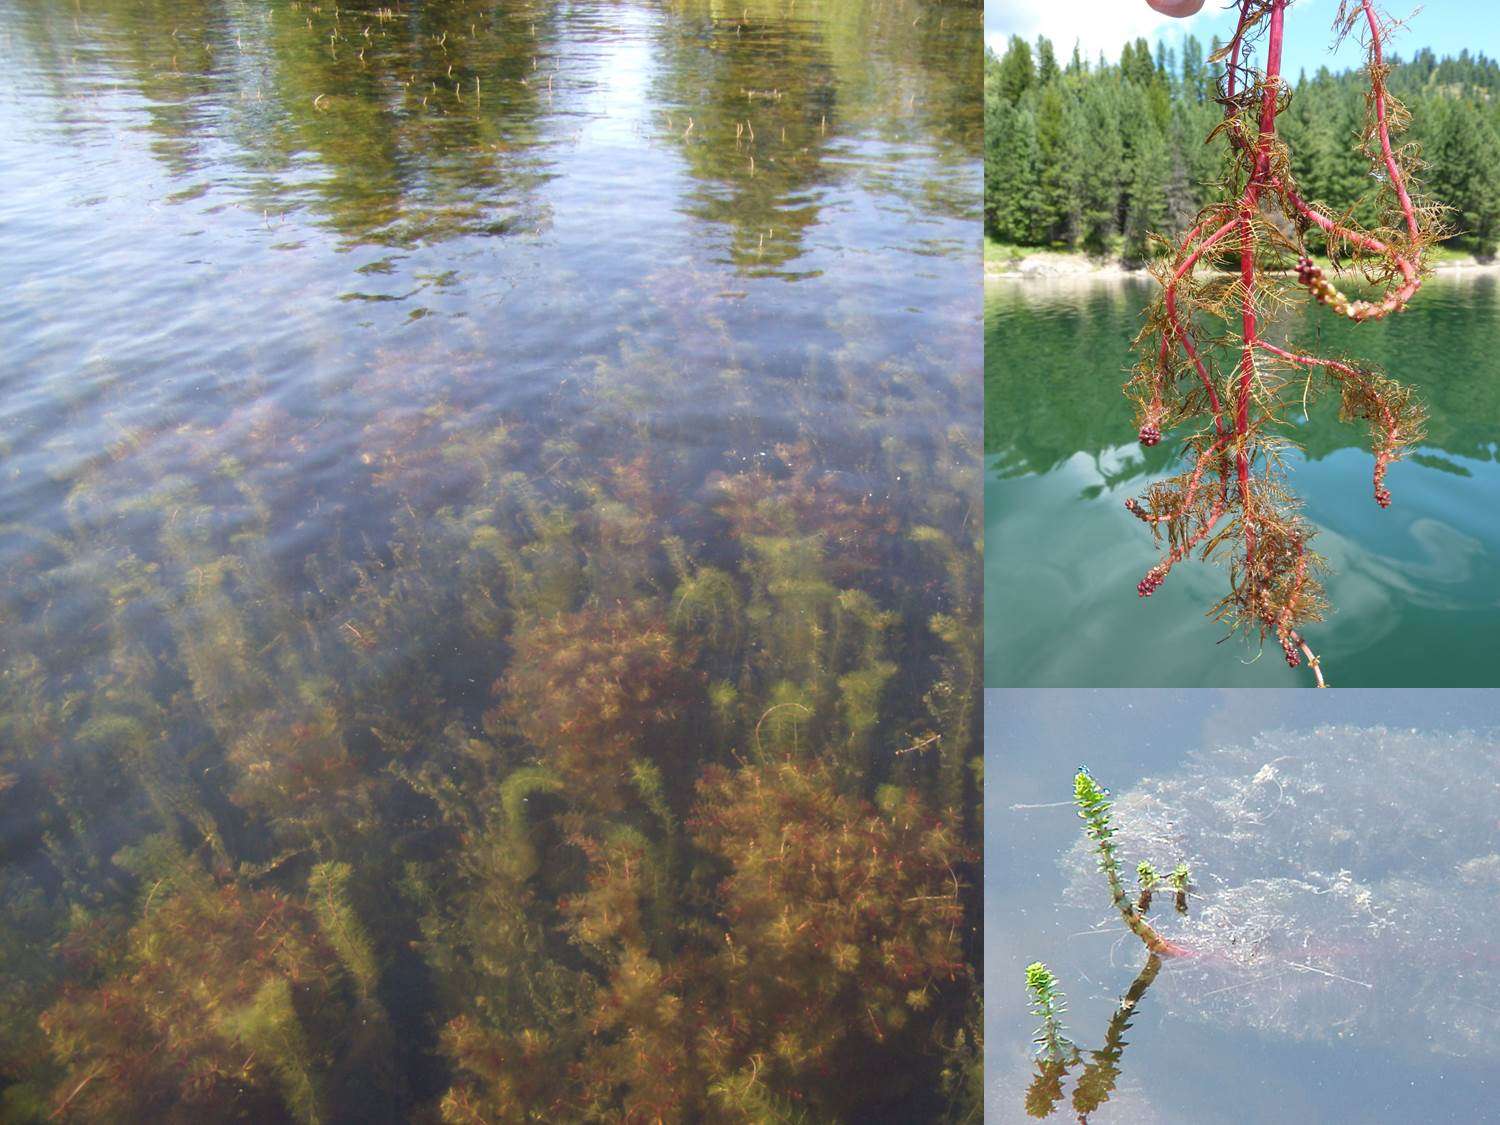 Milfoils (Myriophyllum sp.)
Invasive milfoil plants can be considered some of the first submersed invaders into the United States. With whorls of leaflets around the stem of the plant, the milfoils come in several invasive and native varieties. Invasive Eurasian watermilfoil is certainly one of the most common, growing submersed with a distinct âspikeâ popping out of the water in late summer. Another invasive milfoil is parrotsfeather, which can actually grow out of water or on banks. The milfoils are all very similar, with reports of invasive and natives creating hybrid populations in the wild. Milfoils can often be targeted much like hydrilla with fishing being good for most of the year, with the exception of late summer when the plant forms impenetrable mats.